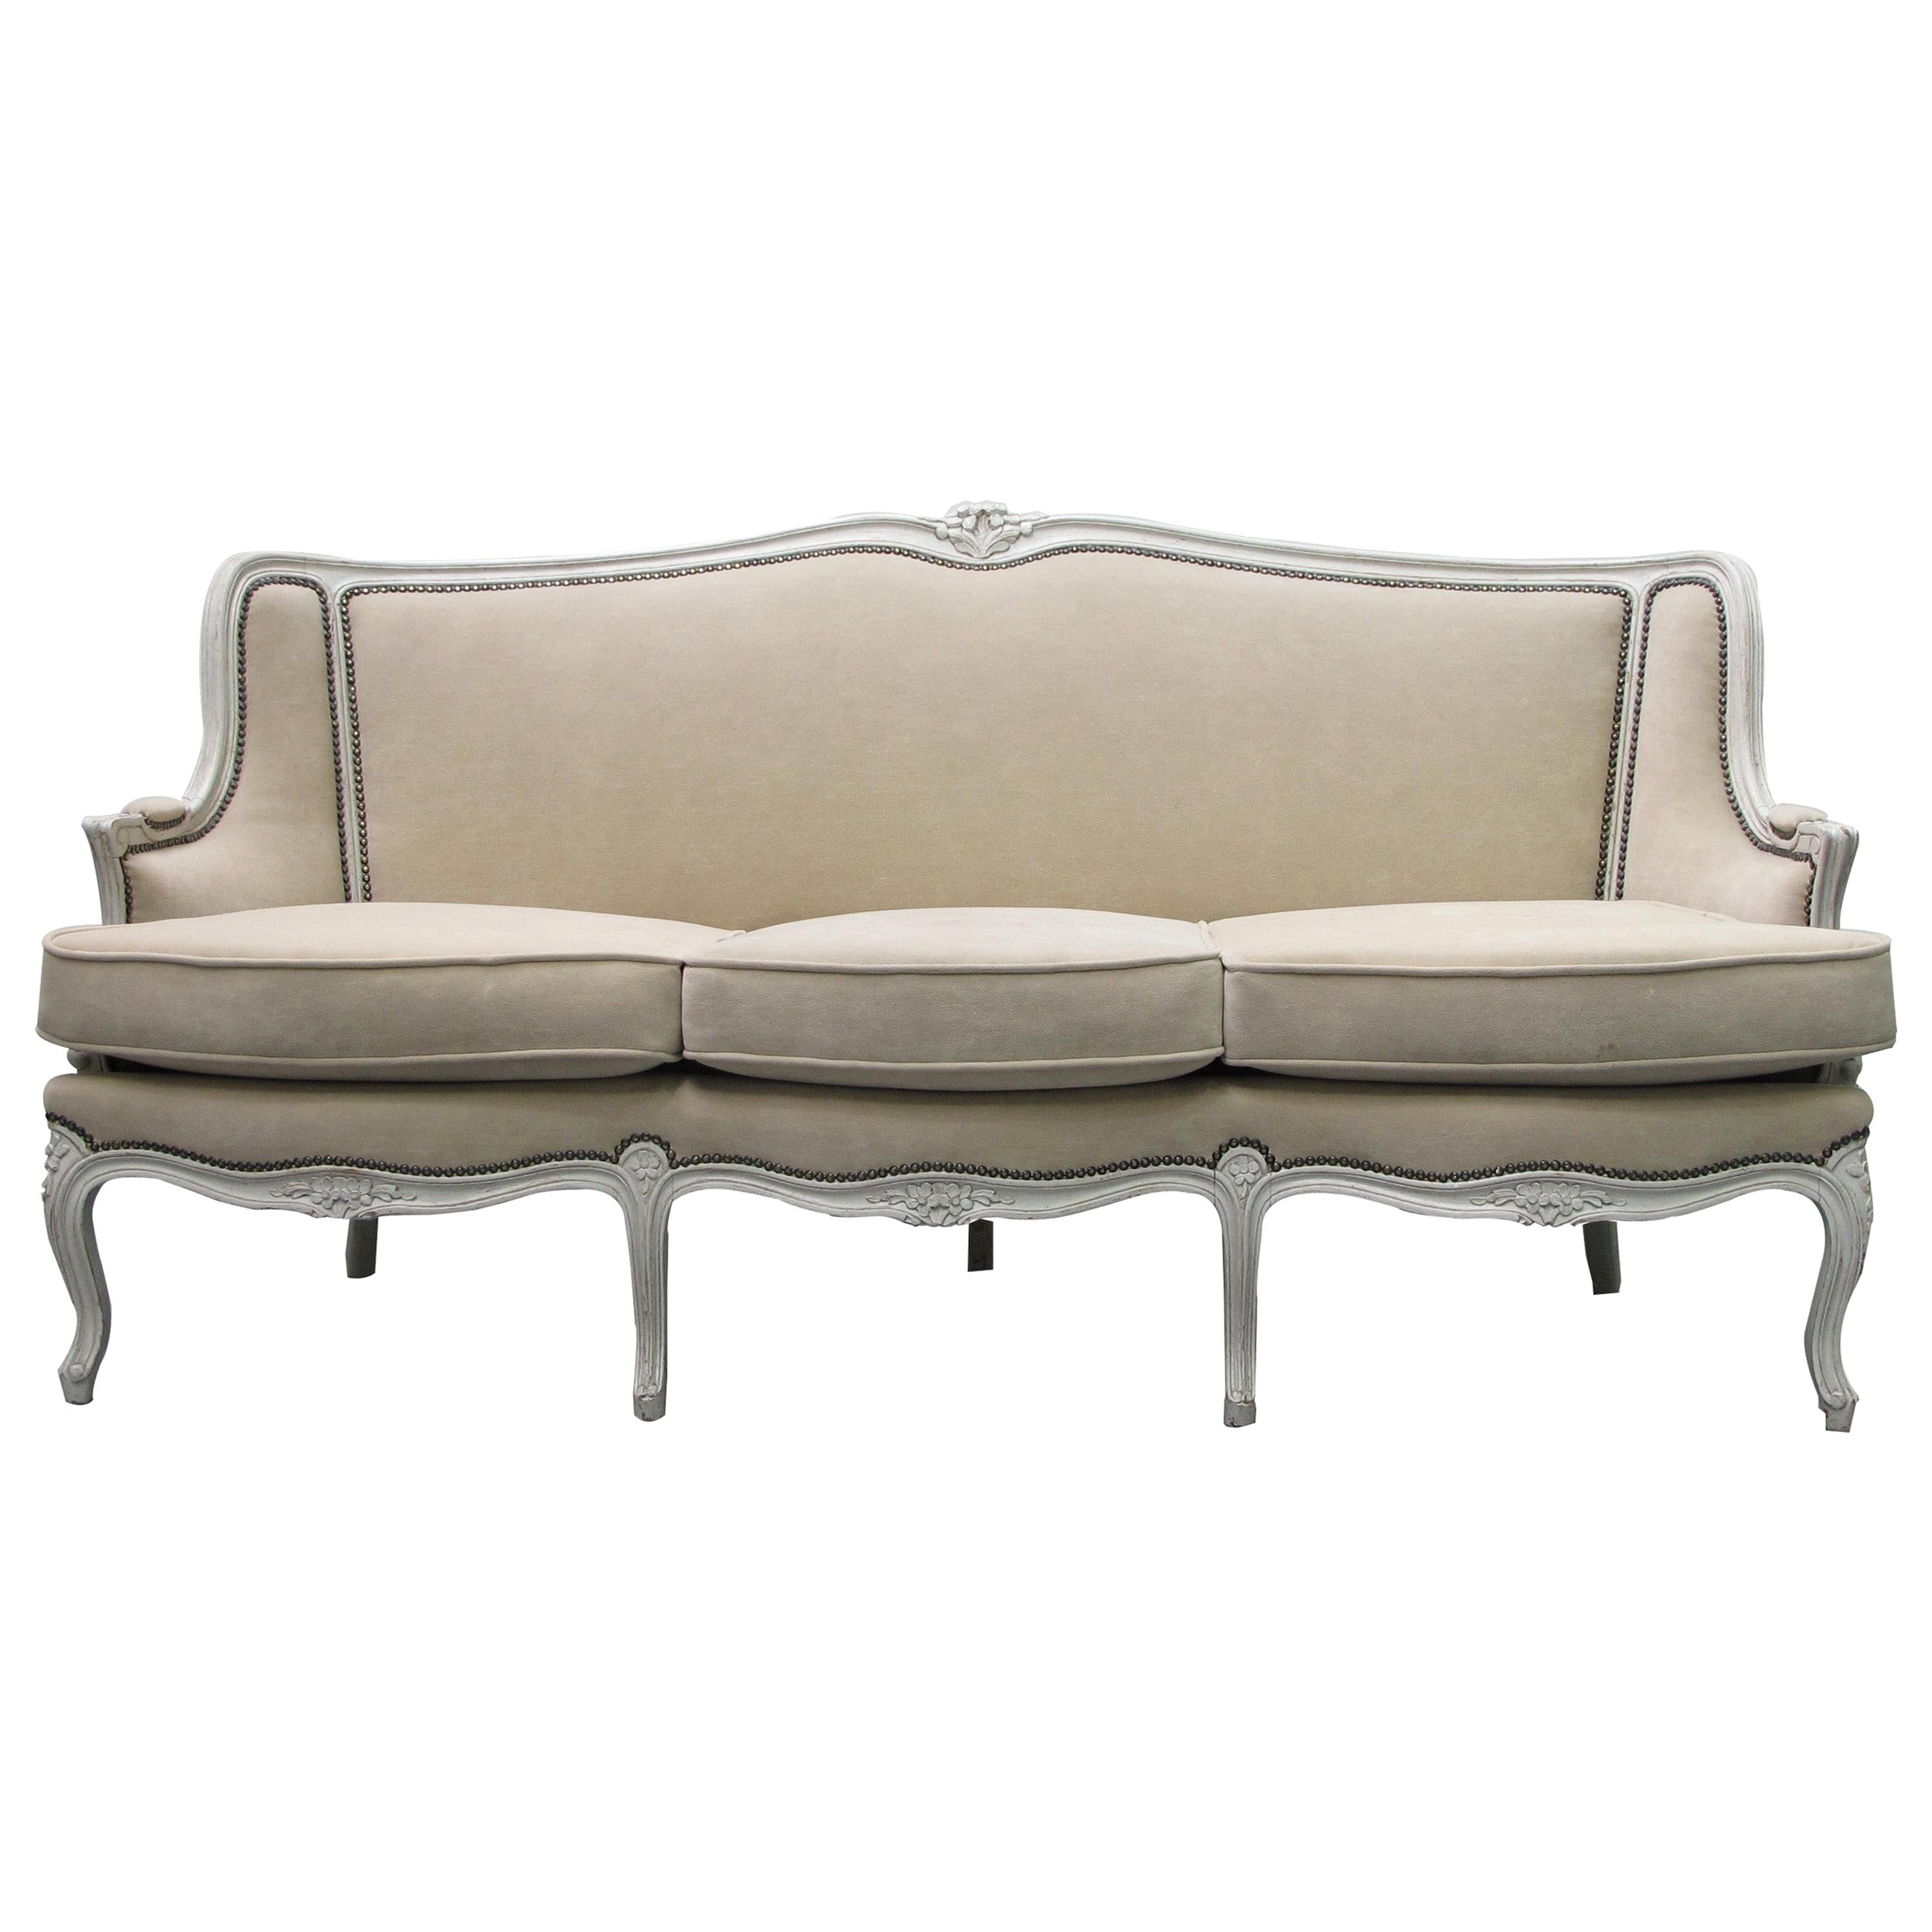 Early 20th Century French Three-Seat Sofa, Louis XV Style with Painted Frame